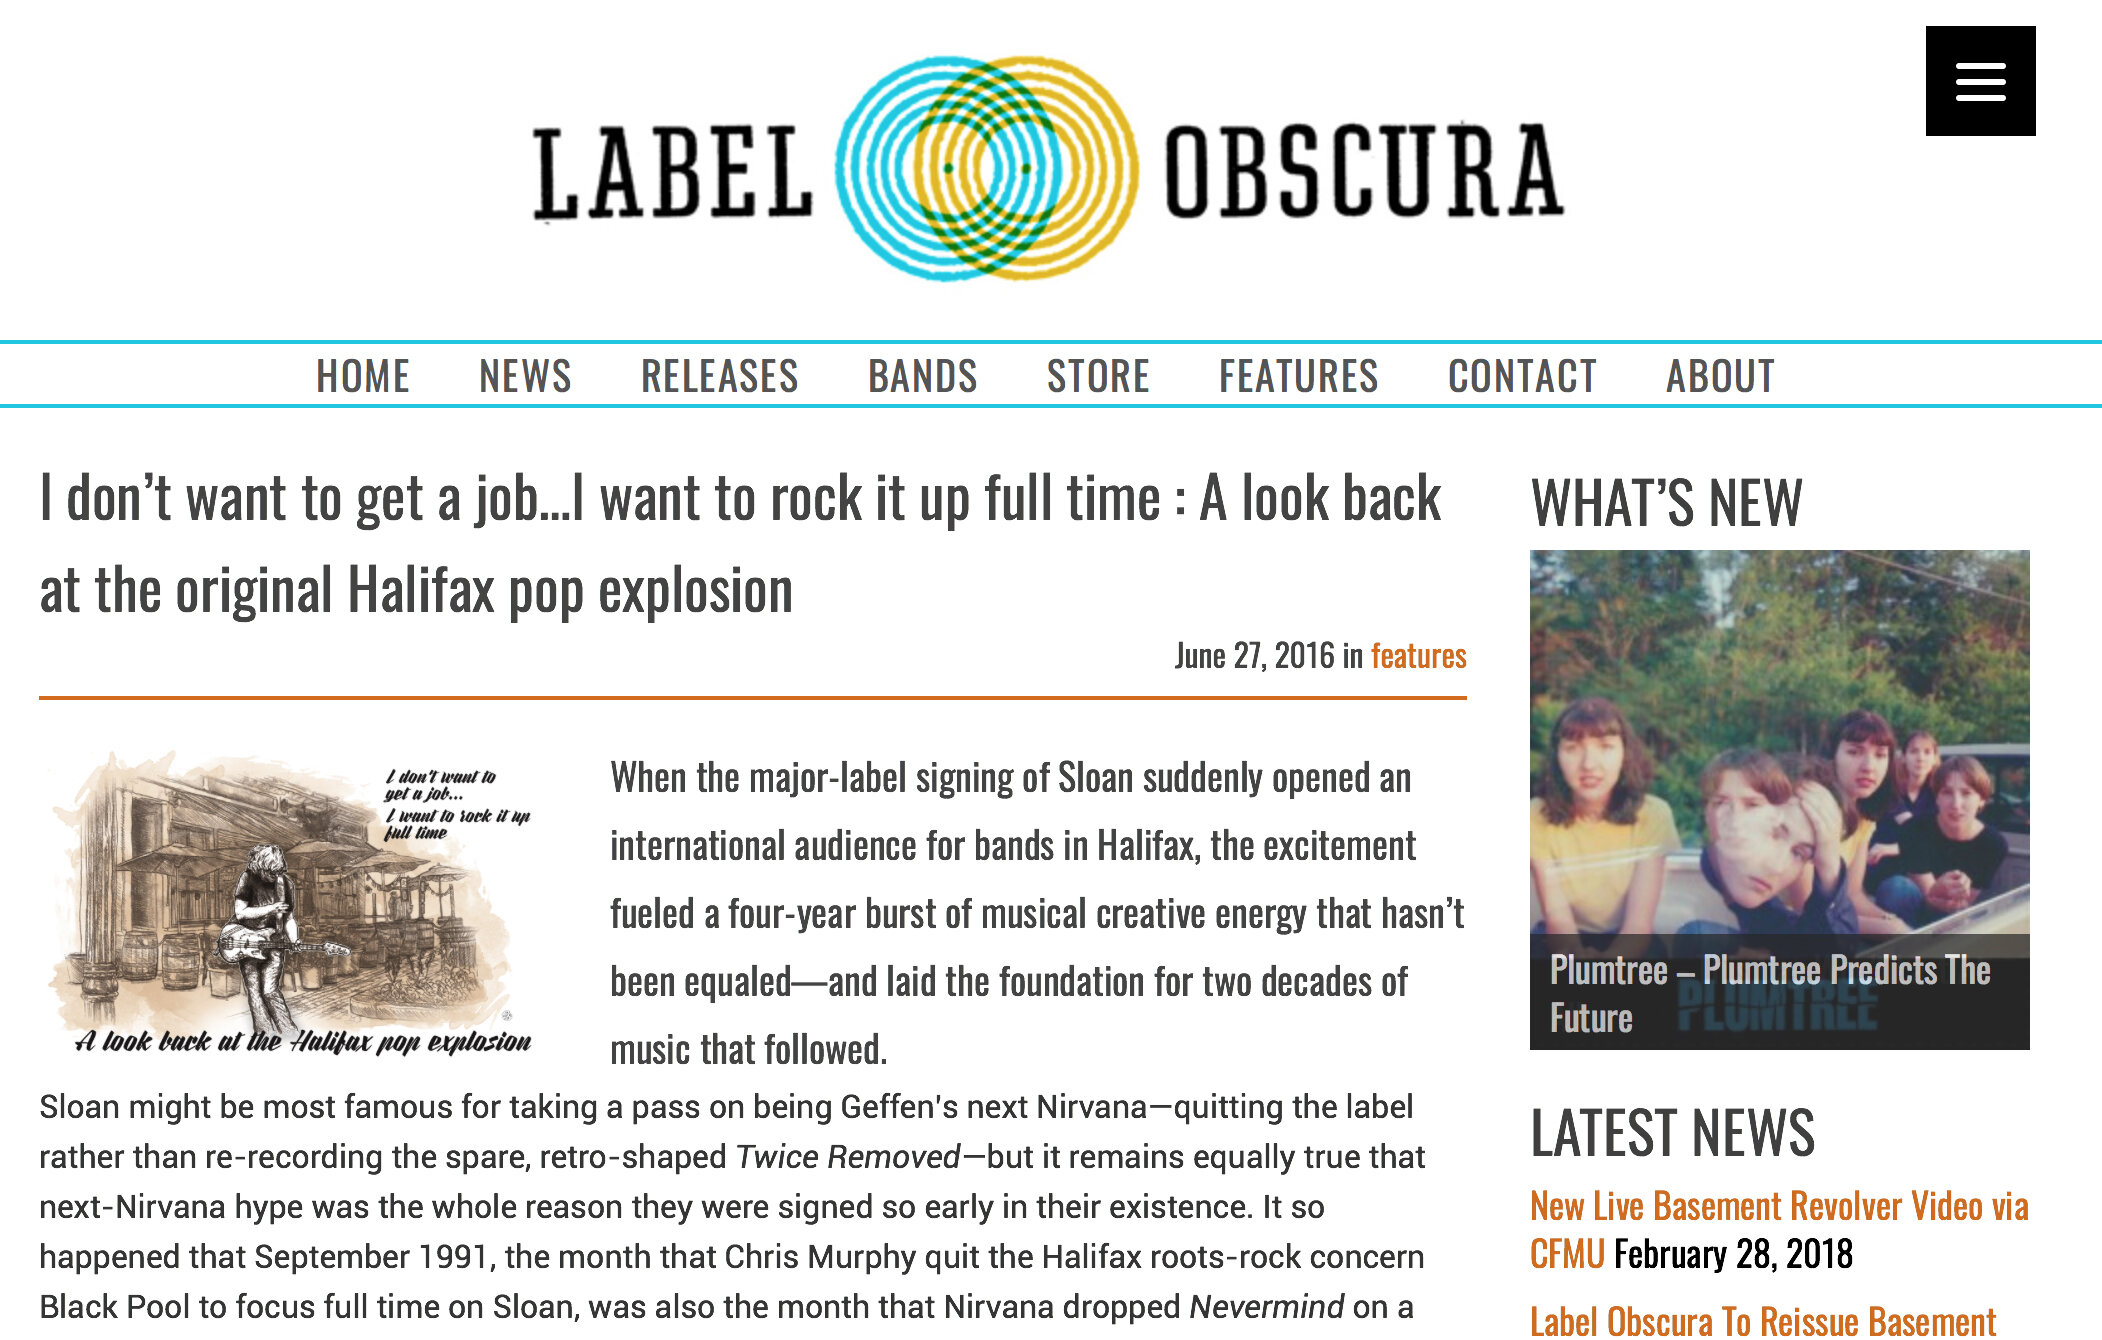 Label-Obscura-'I-want-to-rock-it-up-full-time'-Illustration-WEB.jpg